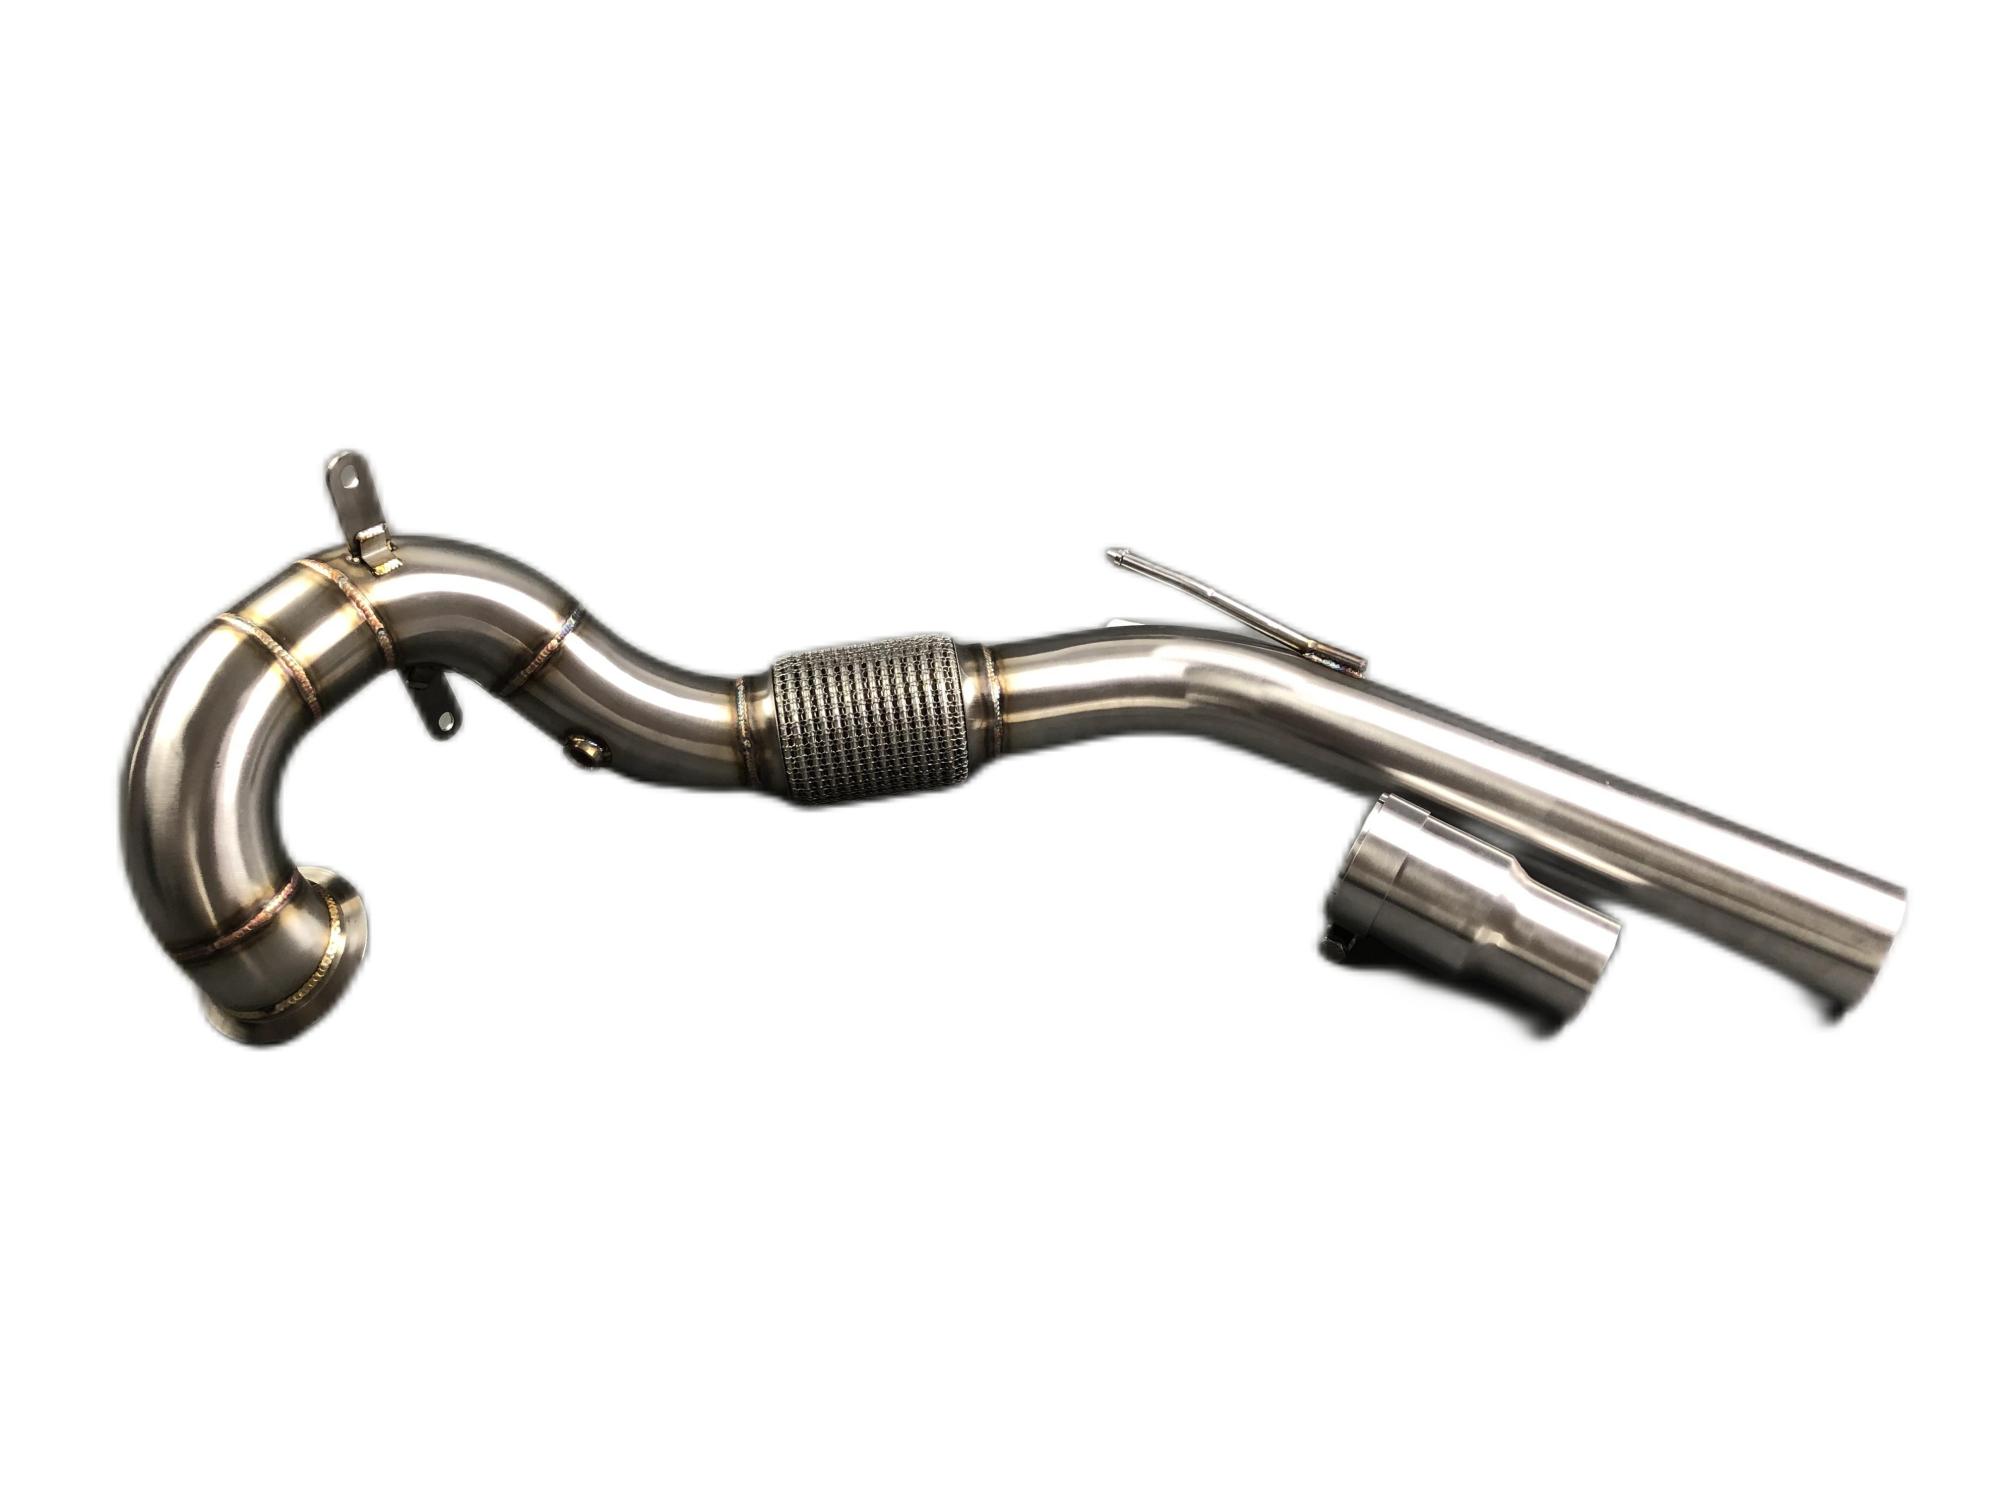 VW GOLF 8 exhaust downpipe